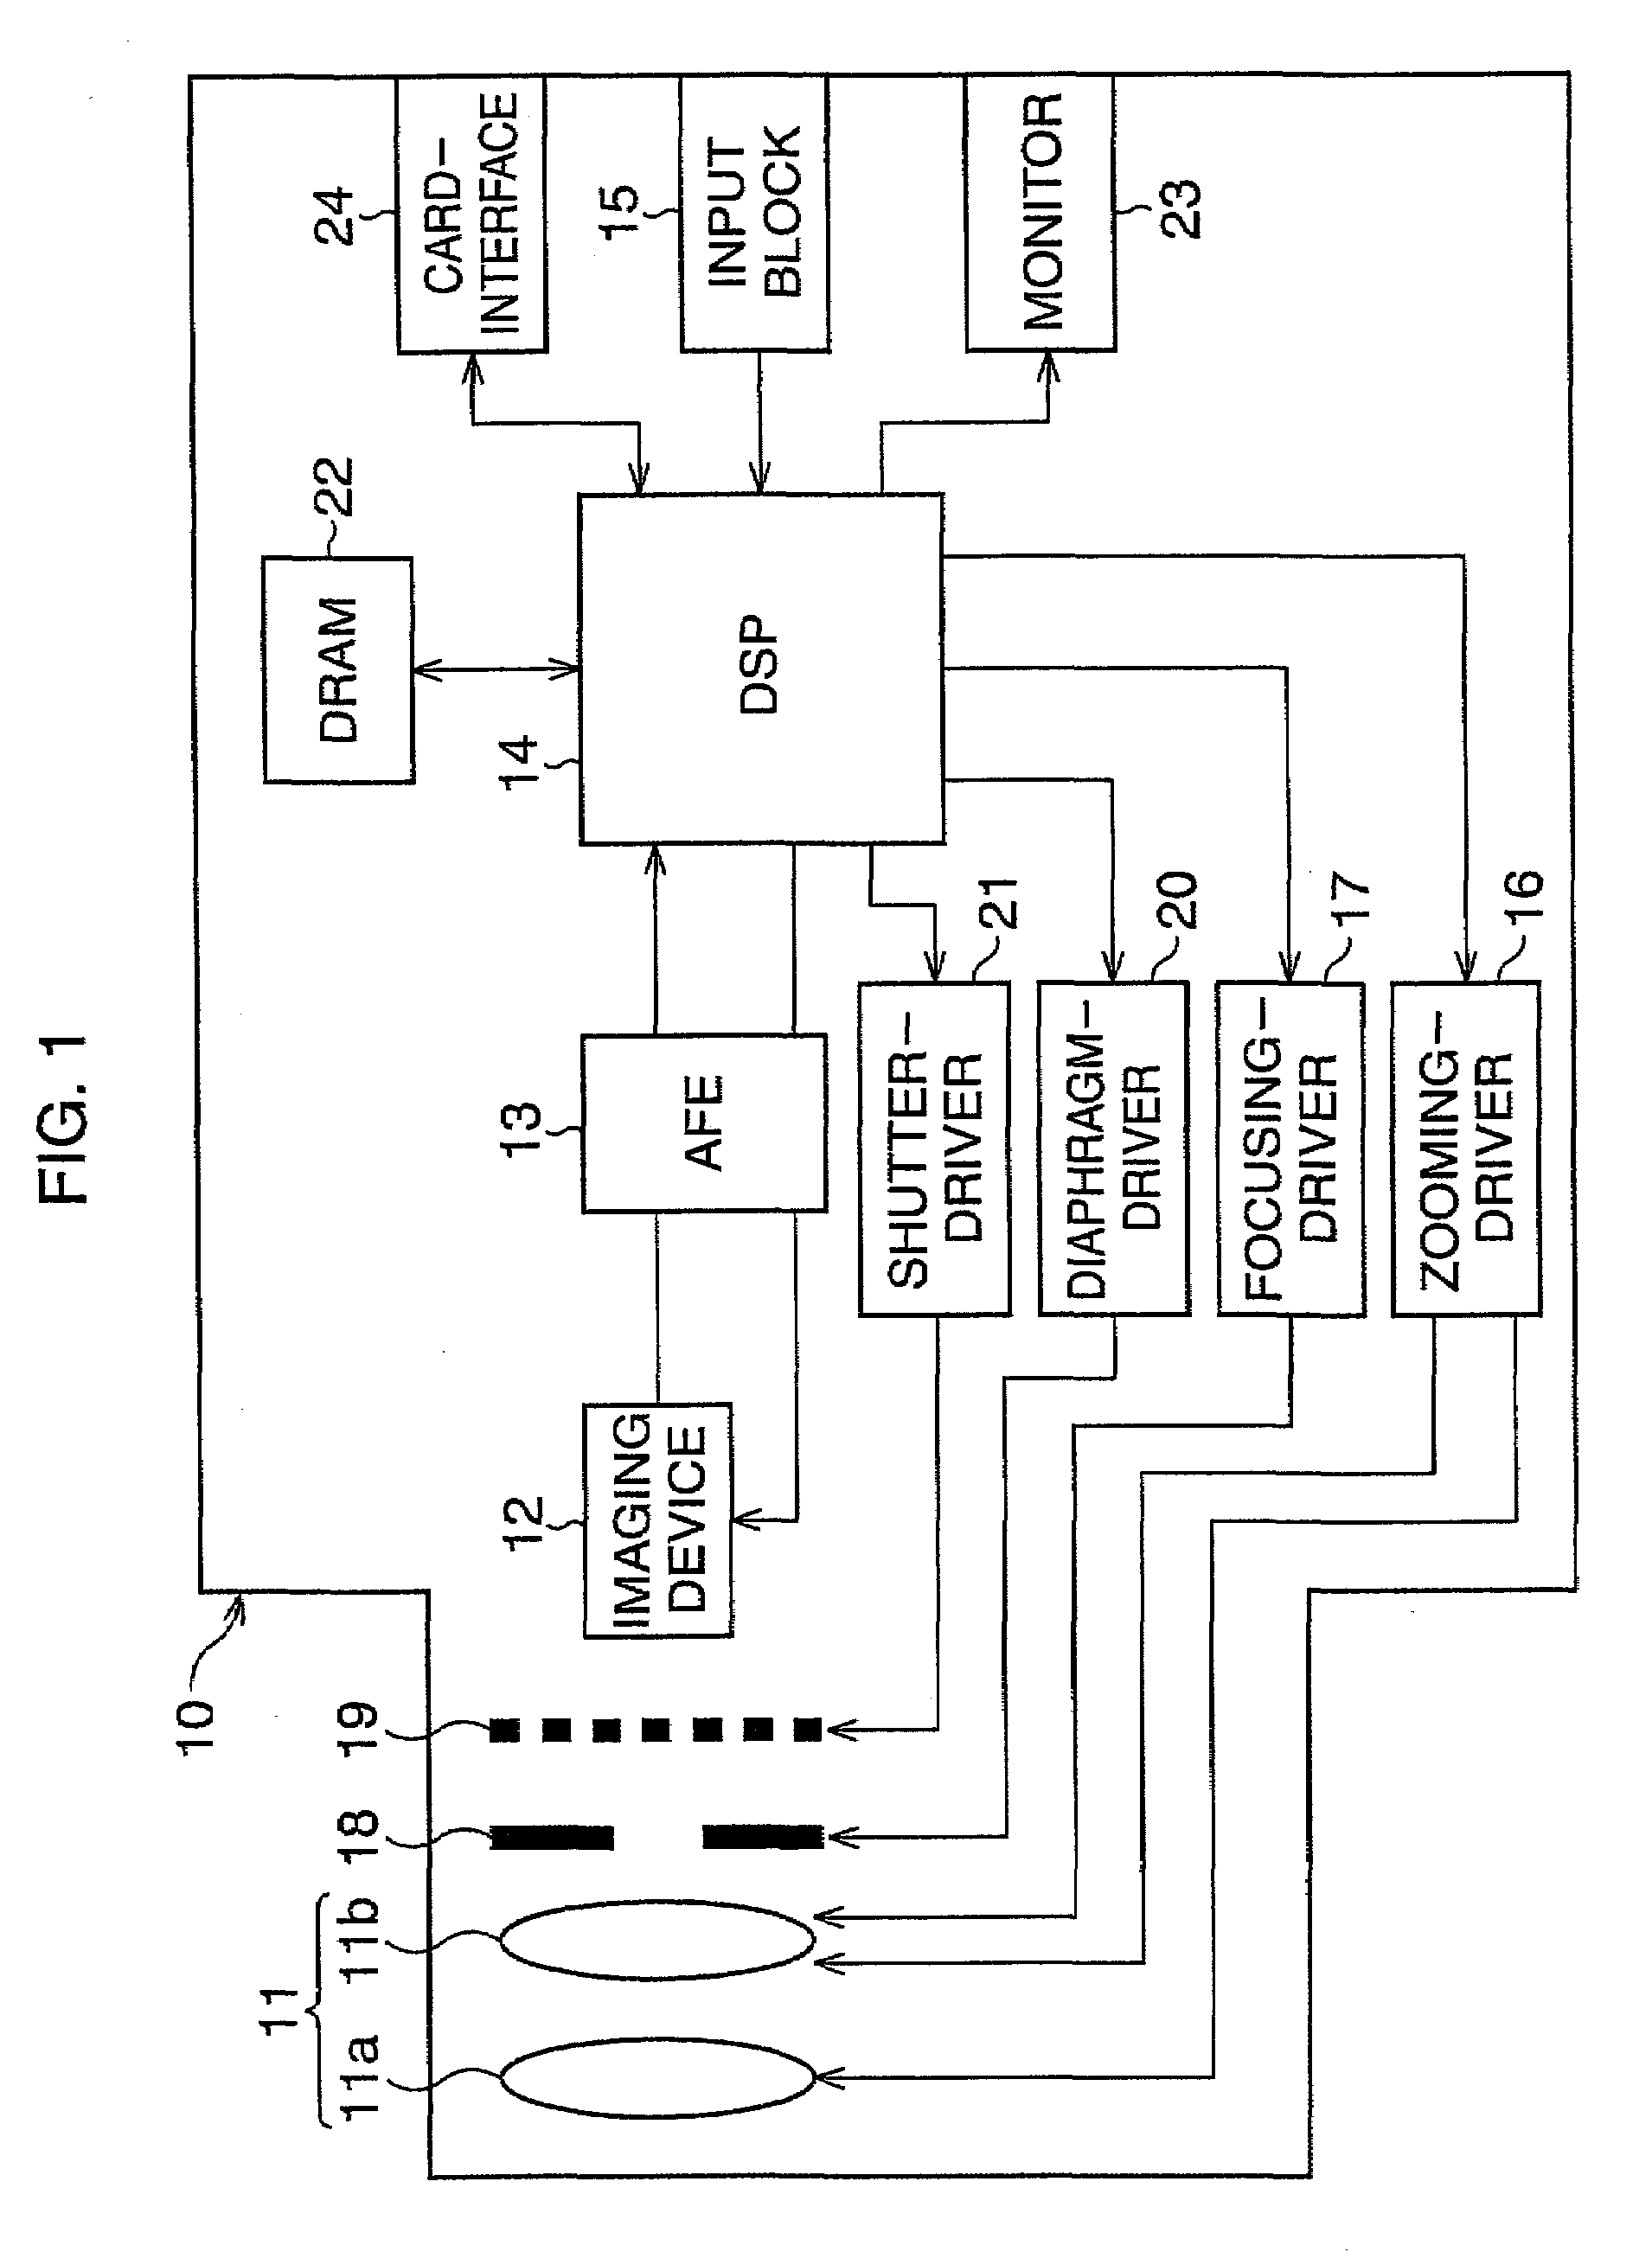 Pattern matching system and targeted object pursuit system